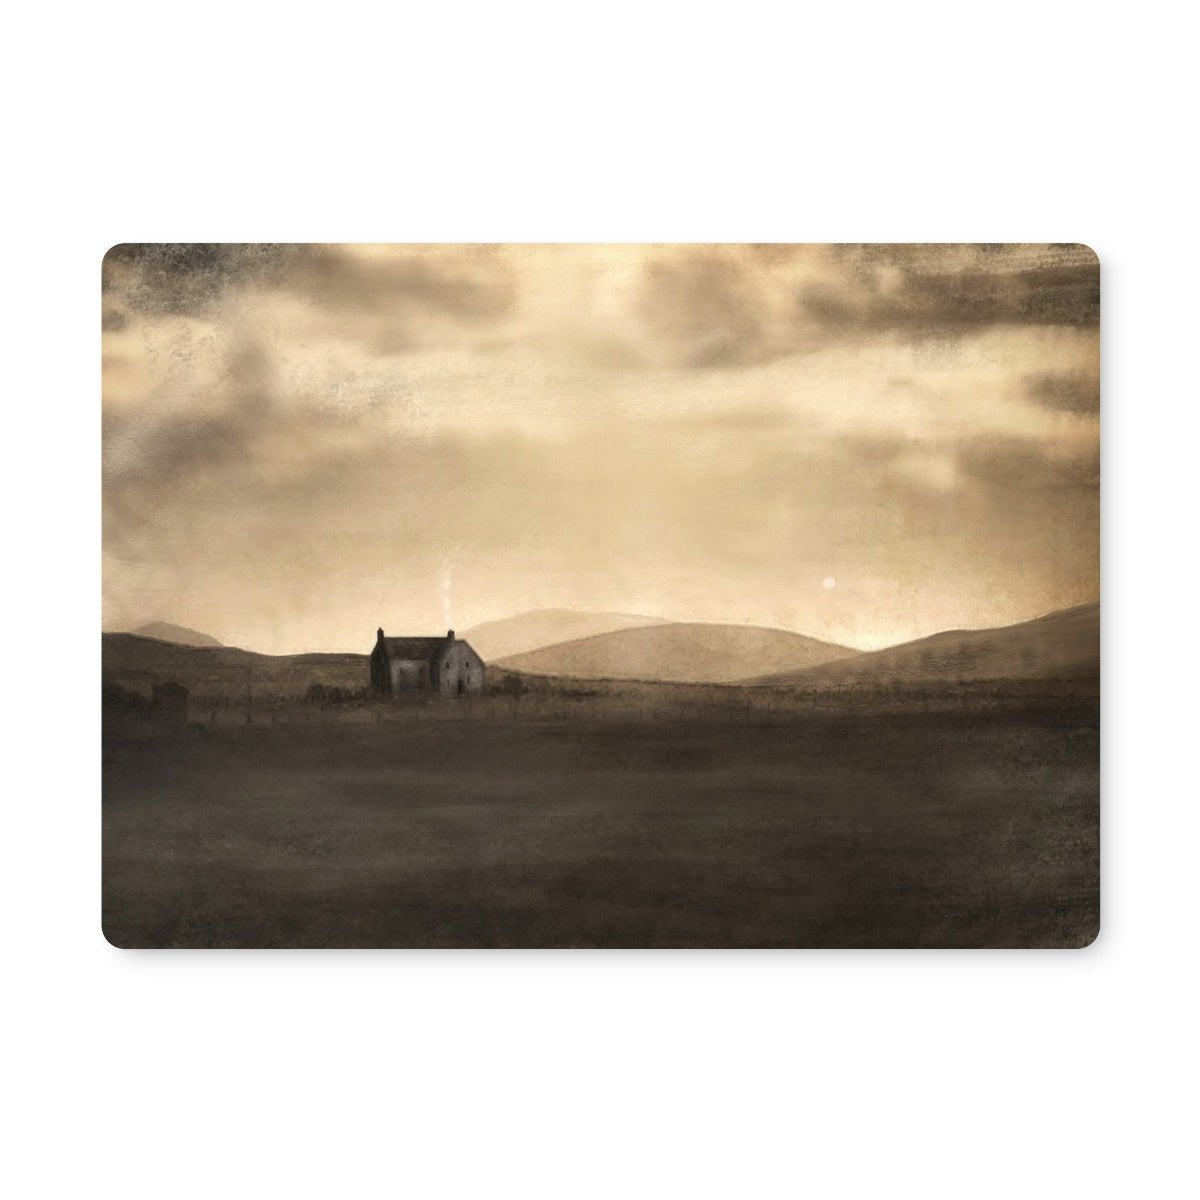 A Moonlit Croft Art Gifts Placemat-Placemats-Hebridean Islands Art Gallery-2 Placemats-Paintings, Prints, Homeware, Art Gifts From Scotland By Scottish Artist Kevin Hunter